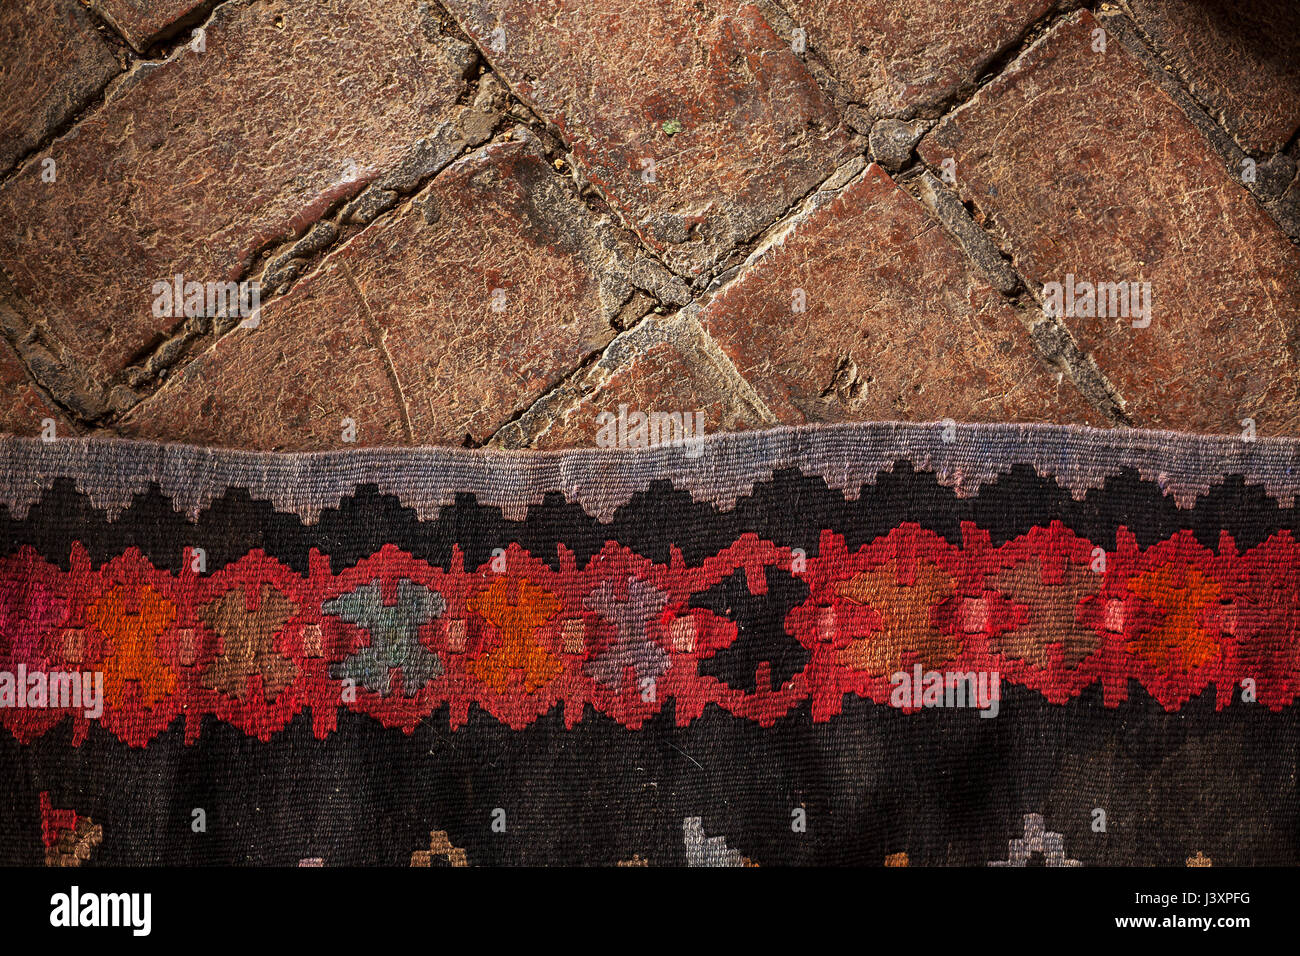 Details of an old decorative embroidery carpet on brick floor. Stock Photo